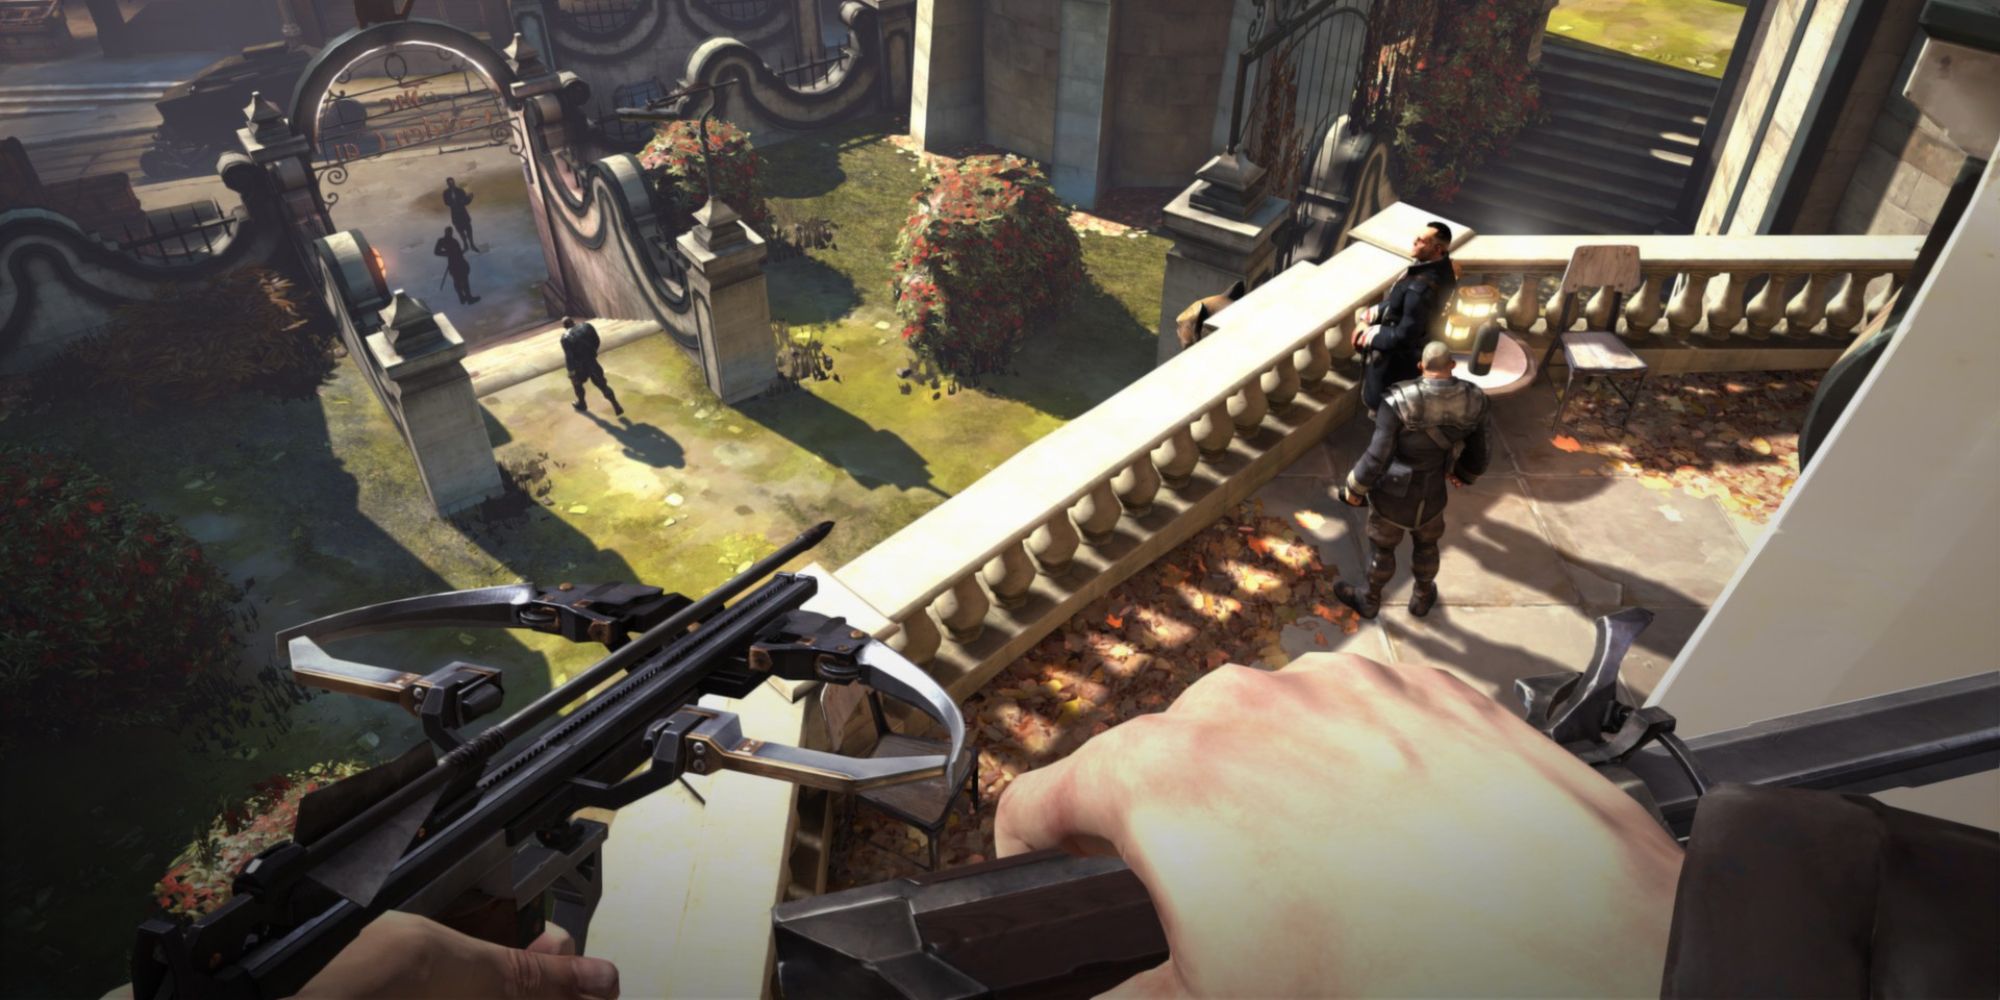 Dishonored Screenshot Showing Protagonist Attack someone with a crossbow